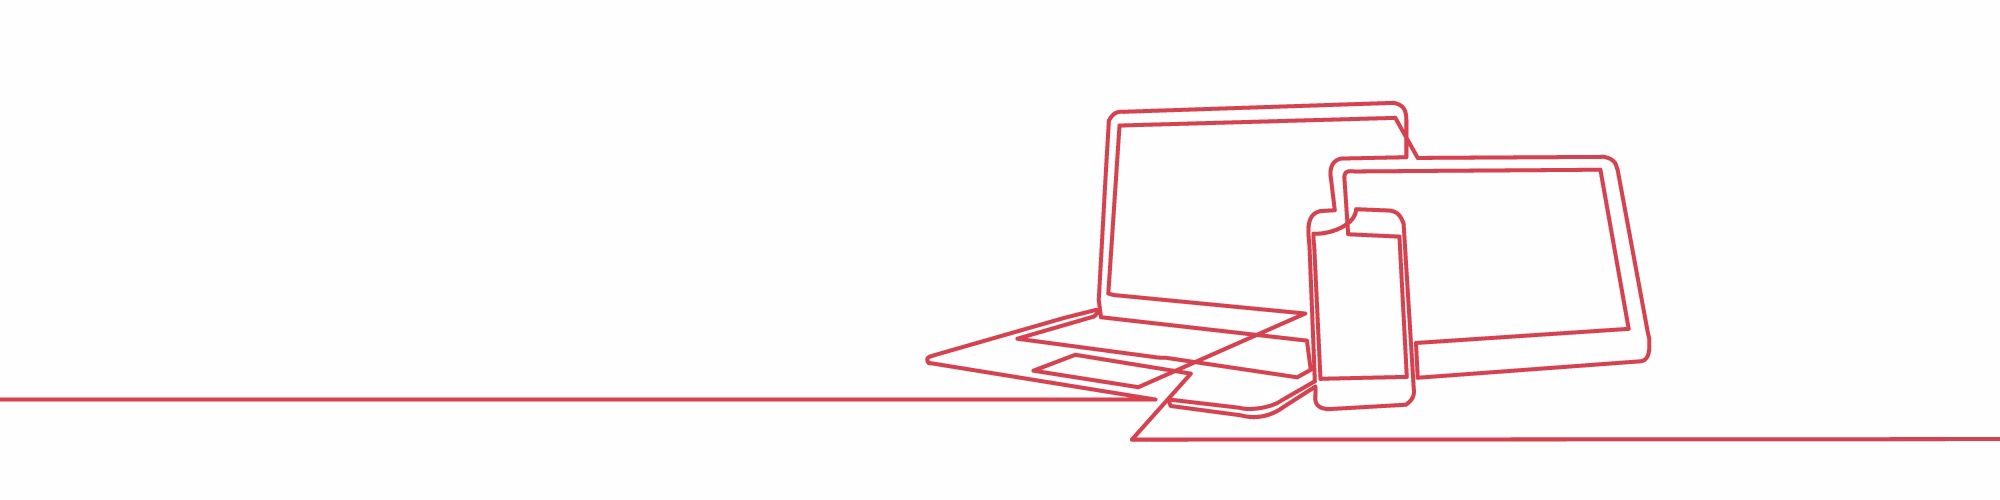 Continuous line art, laptop, phone and iPad